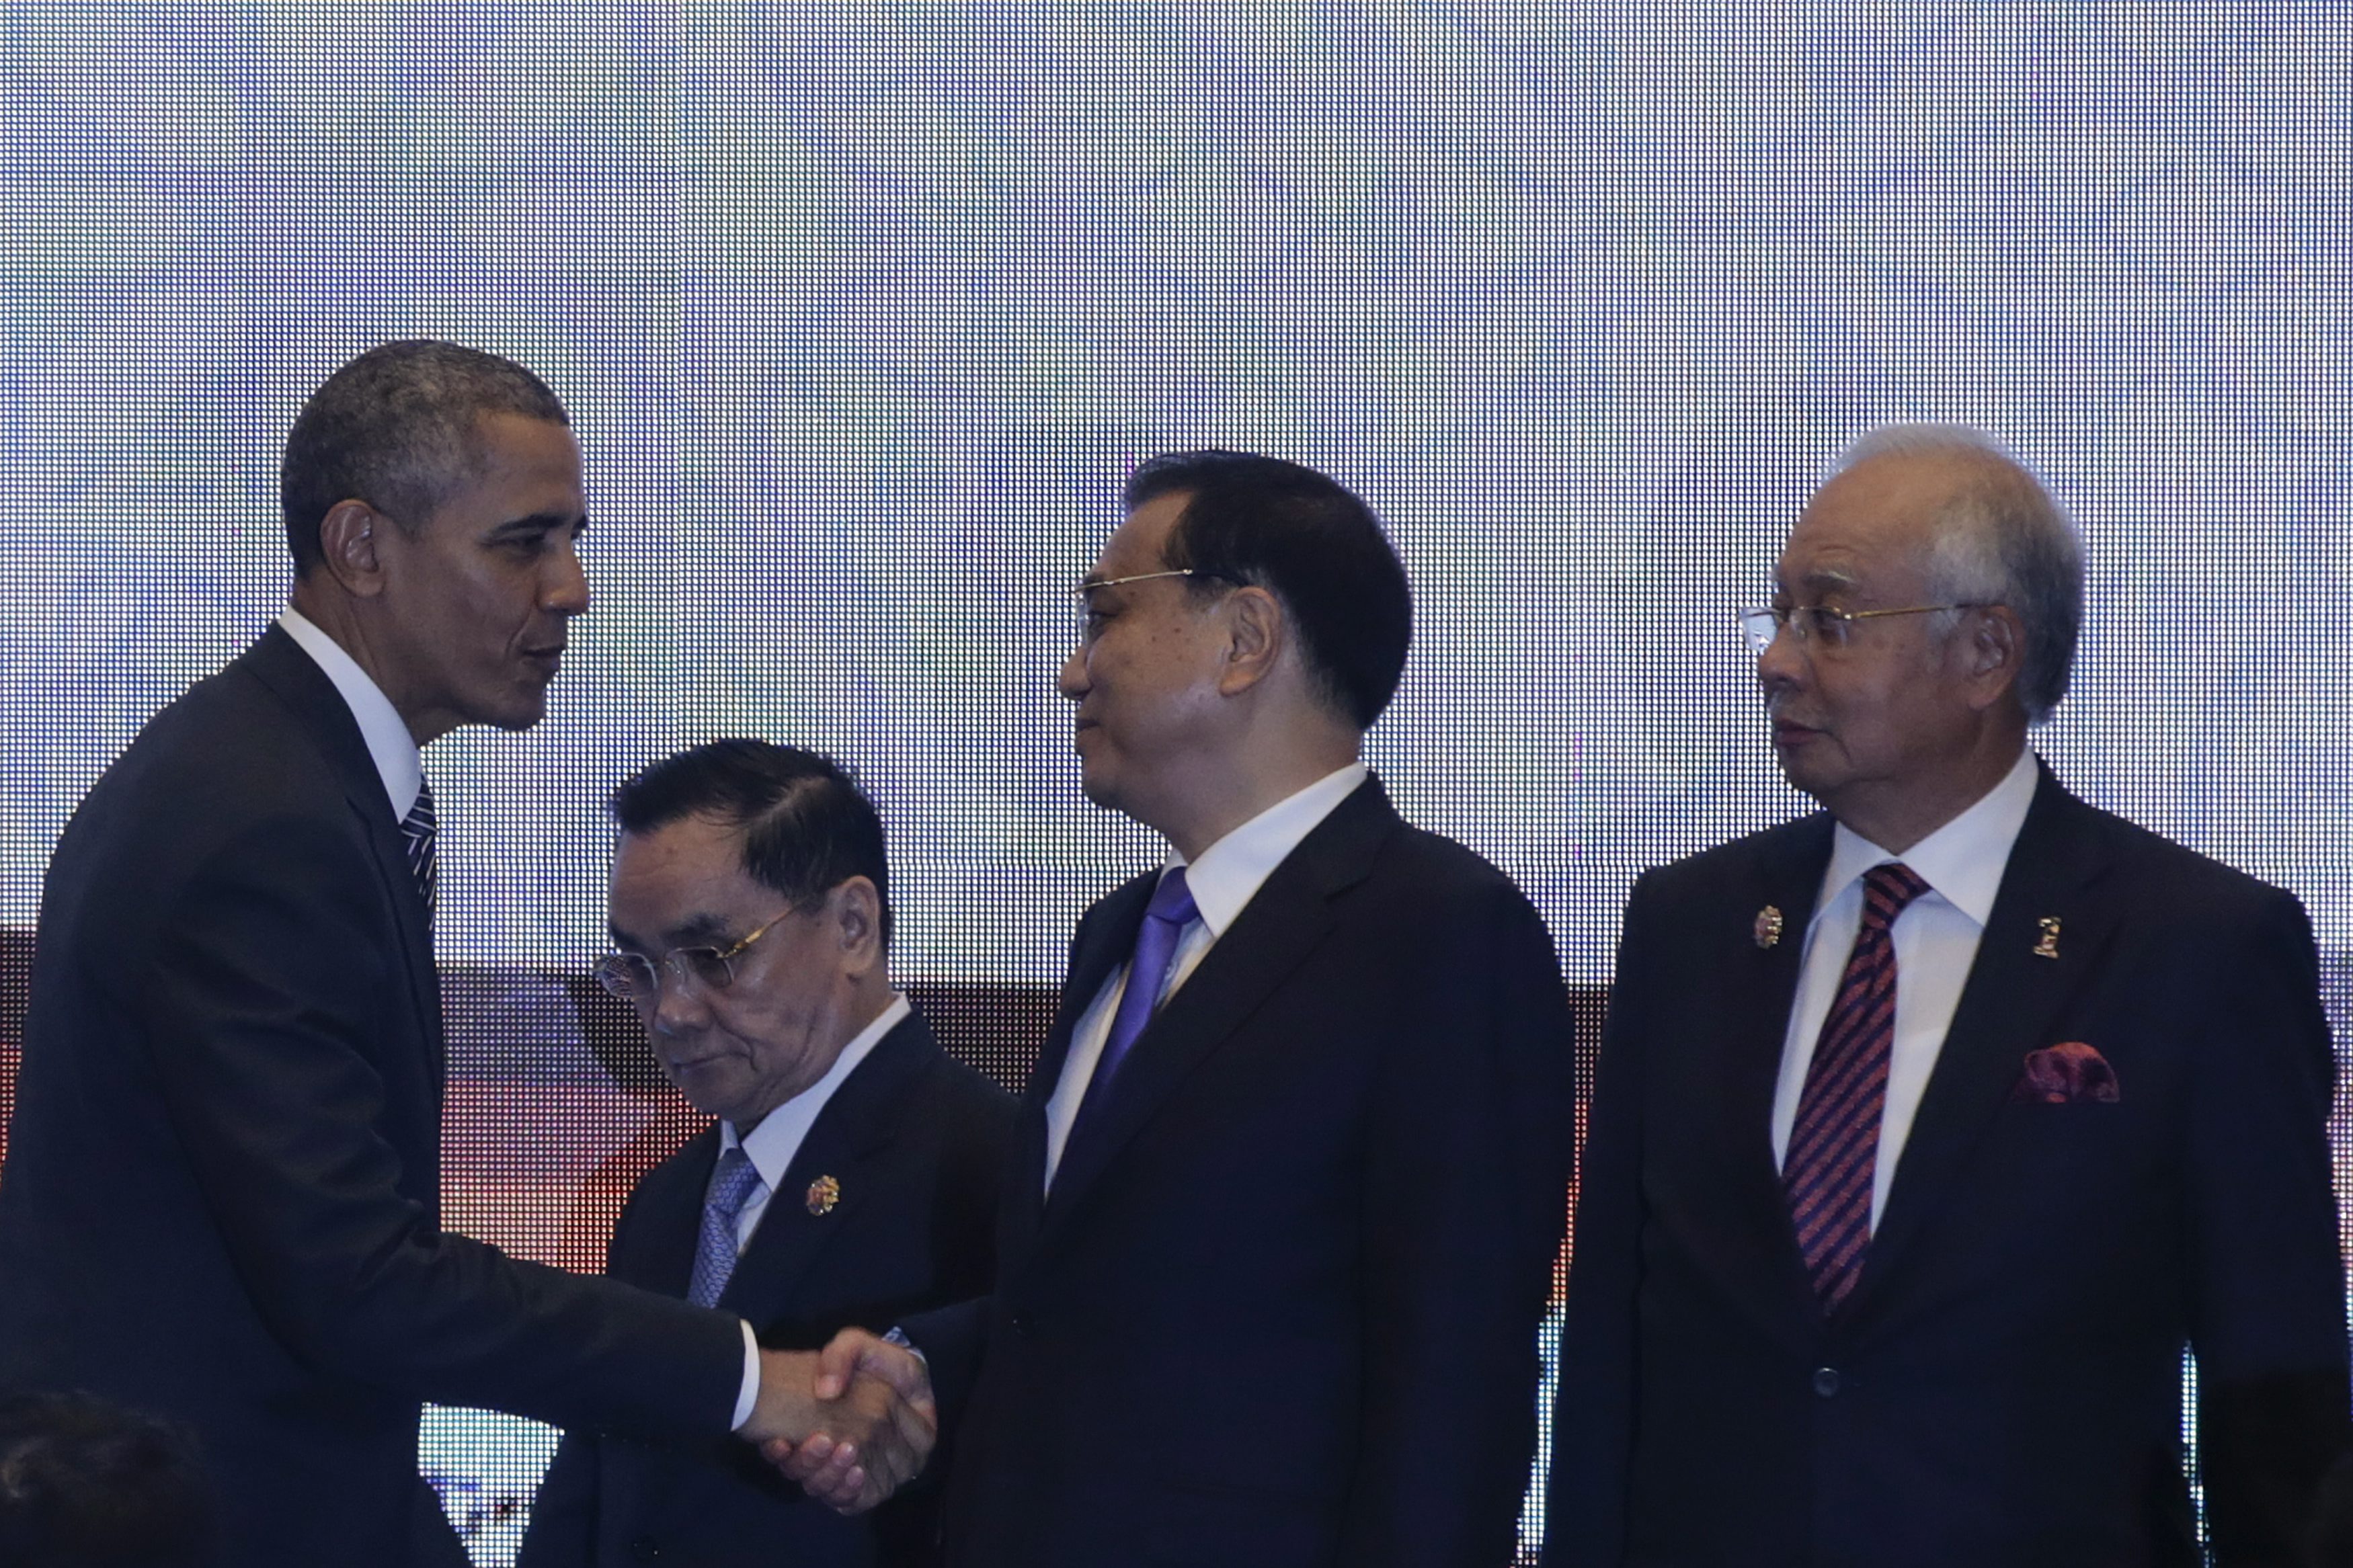 epa05036700 US President Barack Obama (L) shakes hands with Chinese Prime Minister Li Keqiang (2-R), as Malaysia Prime Minister Najib Razak (R) looks on, before posing for photograph at the 10th East Asia Summit during the 27th ASEAN summit in Kuala Lumpur, Malaysia, 22 November 2015. Malaysia is hosting the 27th ASEAN Summit, a meeting between ASEAN member countries and its three dialogue partners China, Japan and Korea, as well as a meeting of the East Asia Summit (EAS) forum. EPA/FAZRY ISMAIL